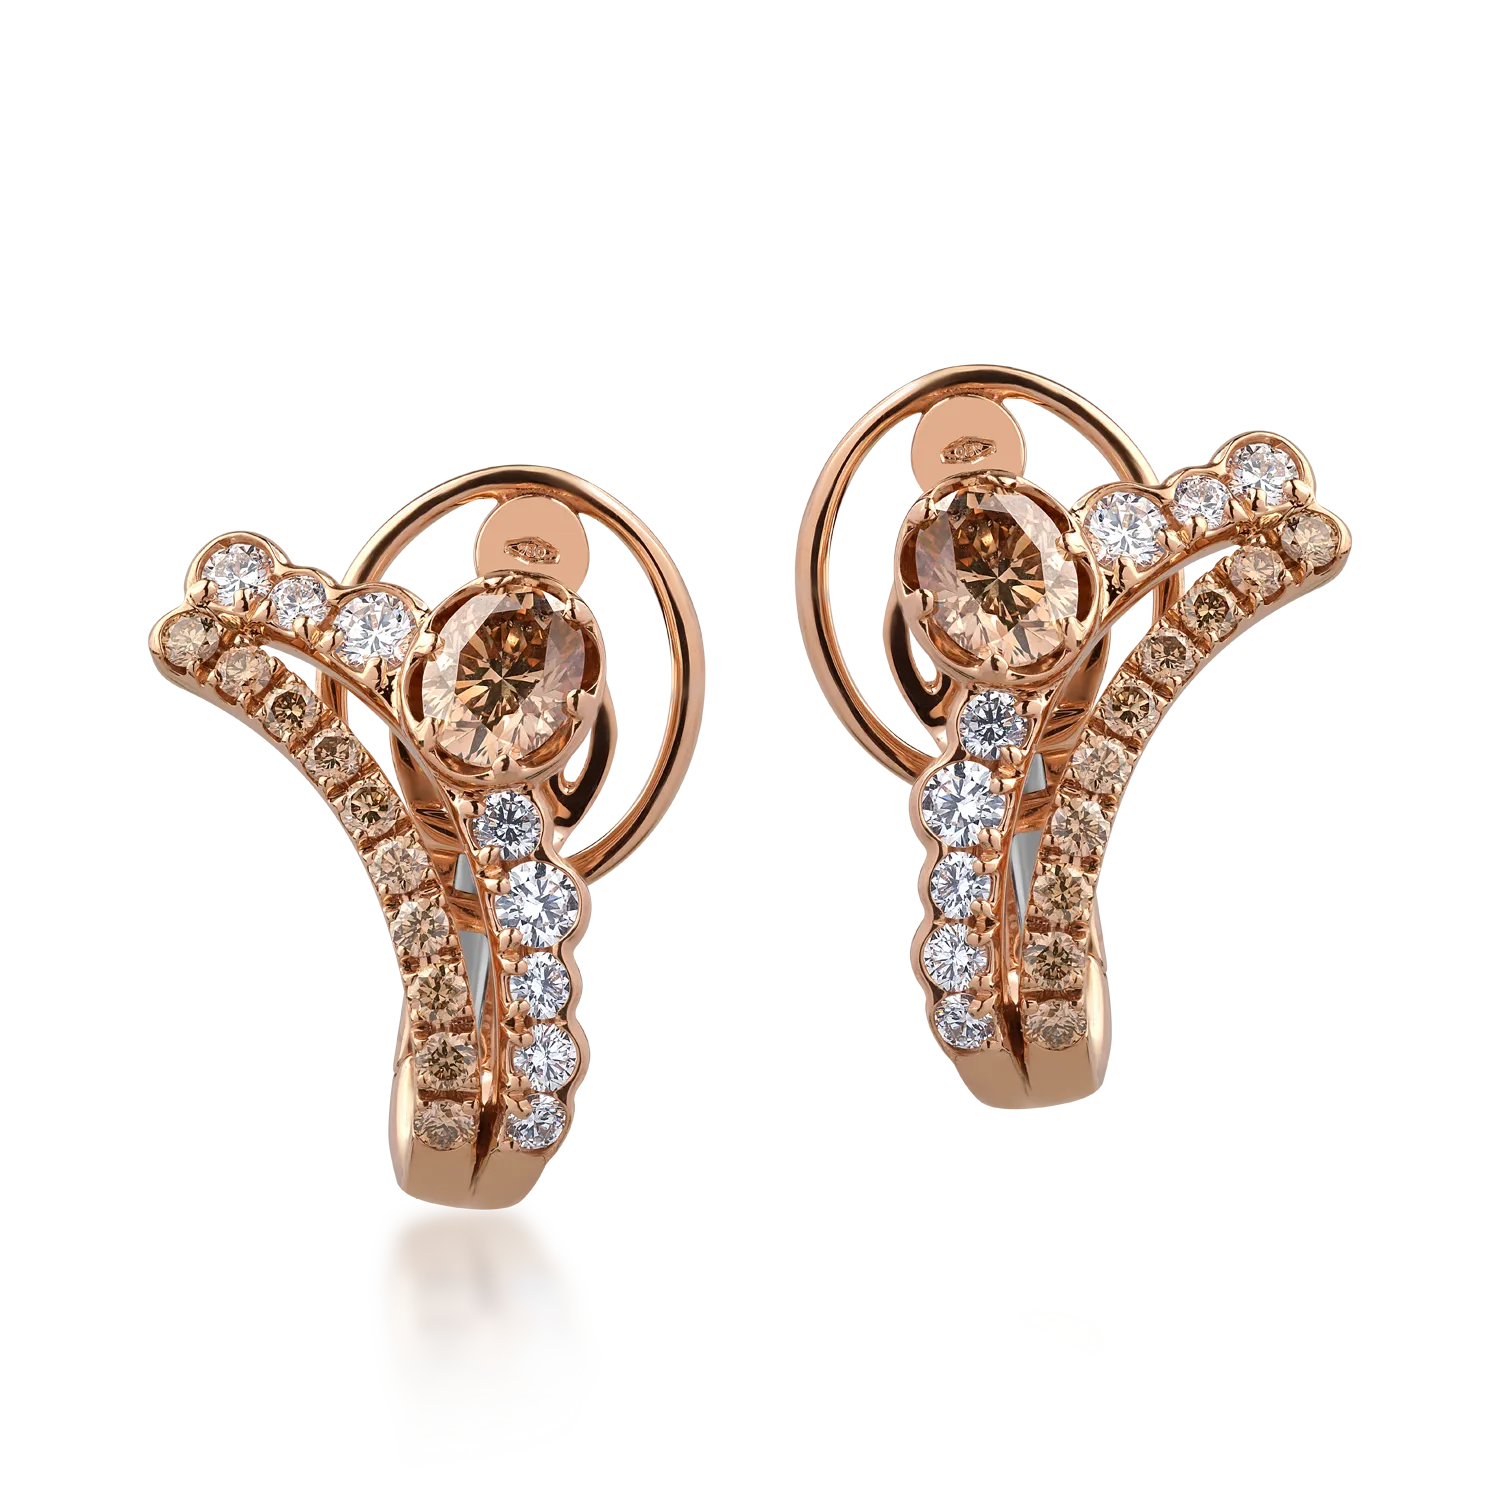 18K rose gold earrings with 2.15ct diamonds